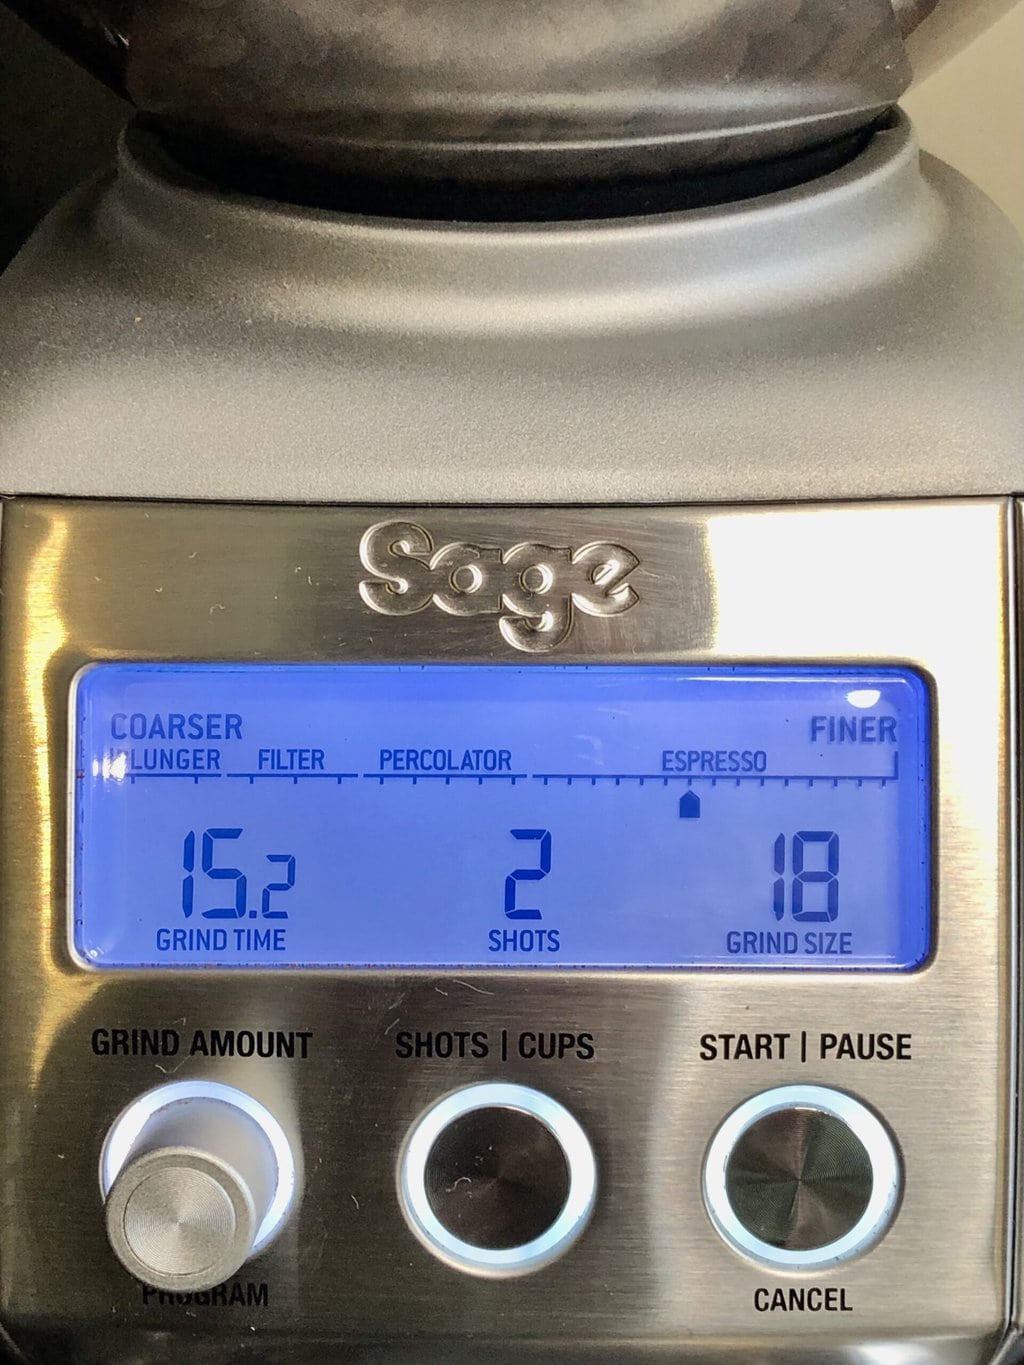 The Smart Grinder Pro LCD display